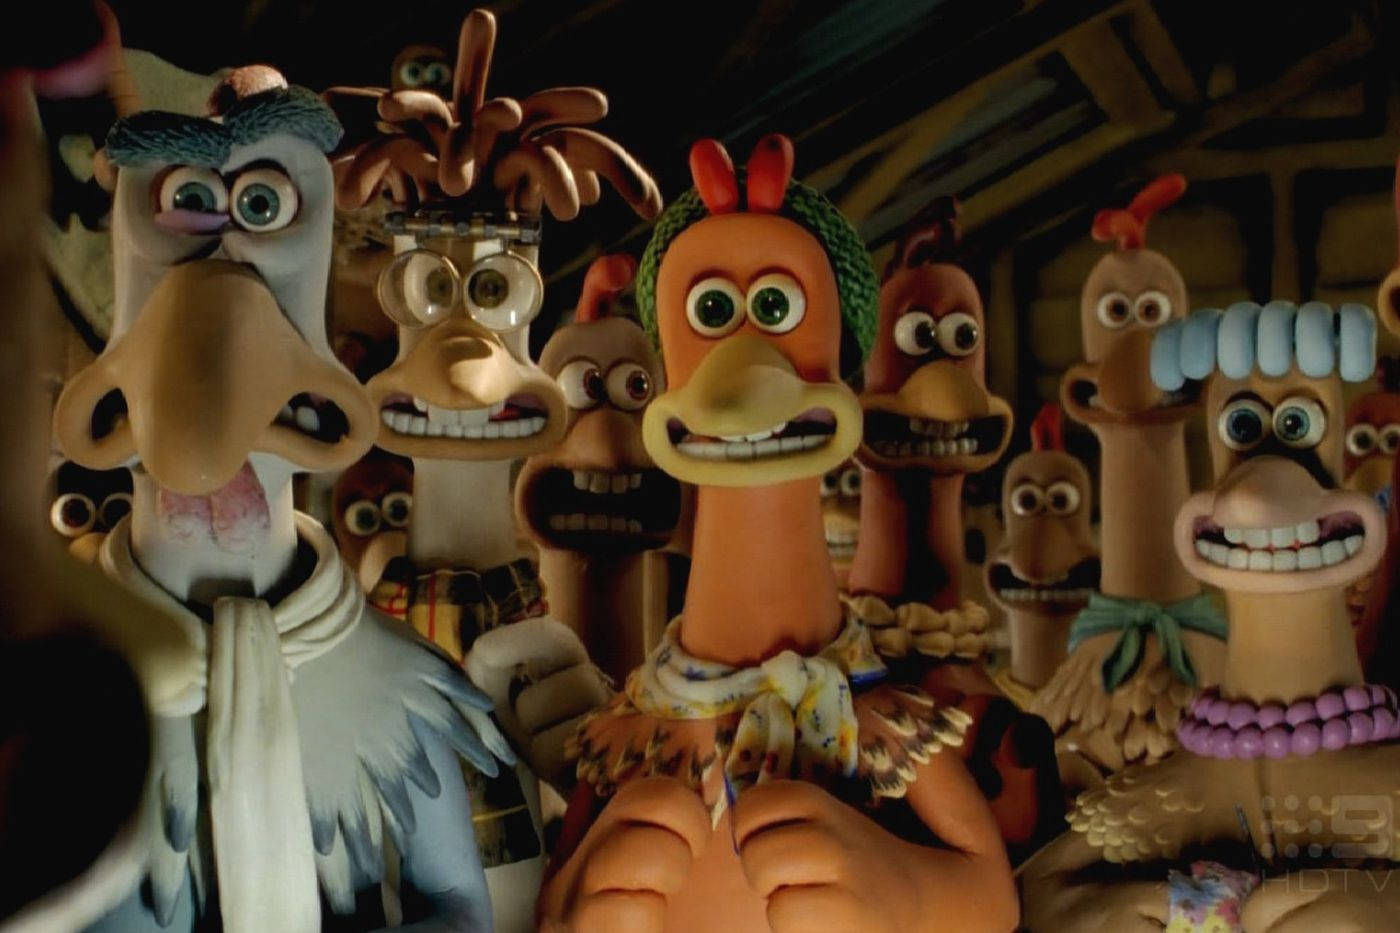 The Chicken Run Characters Wallpaper